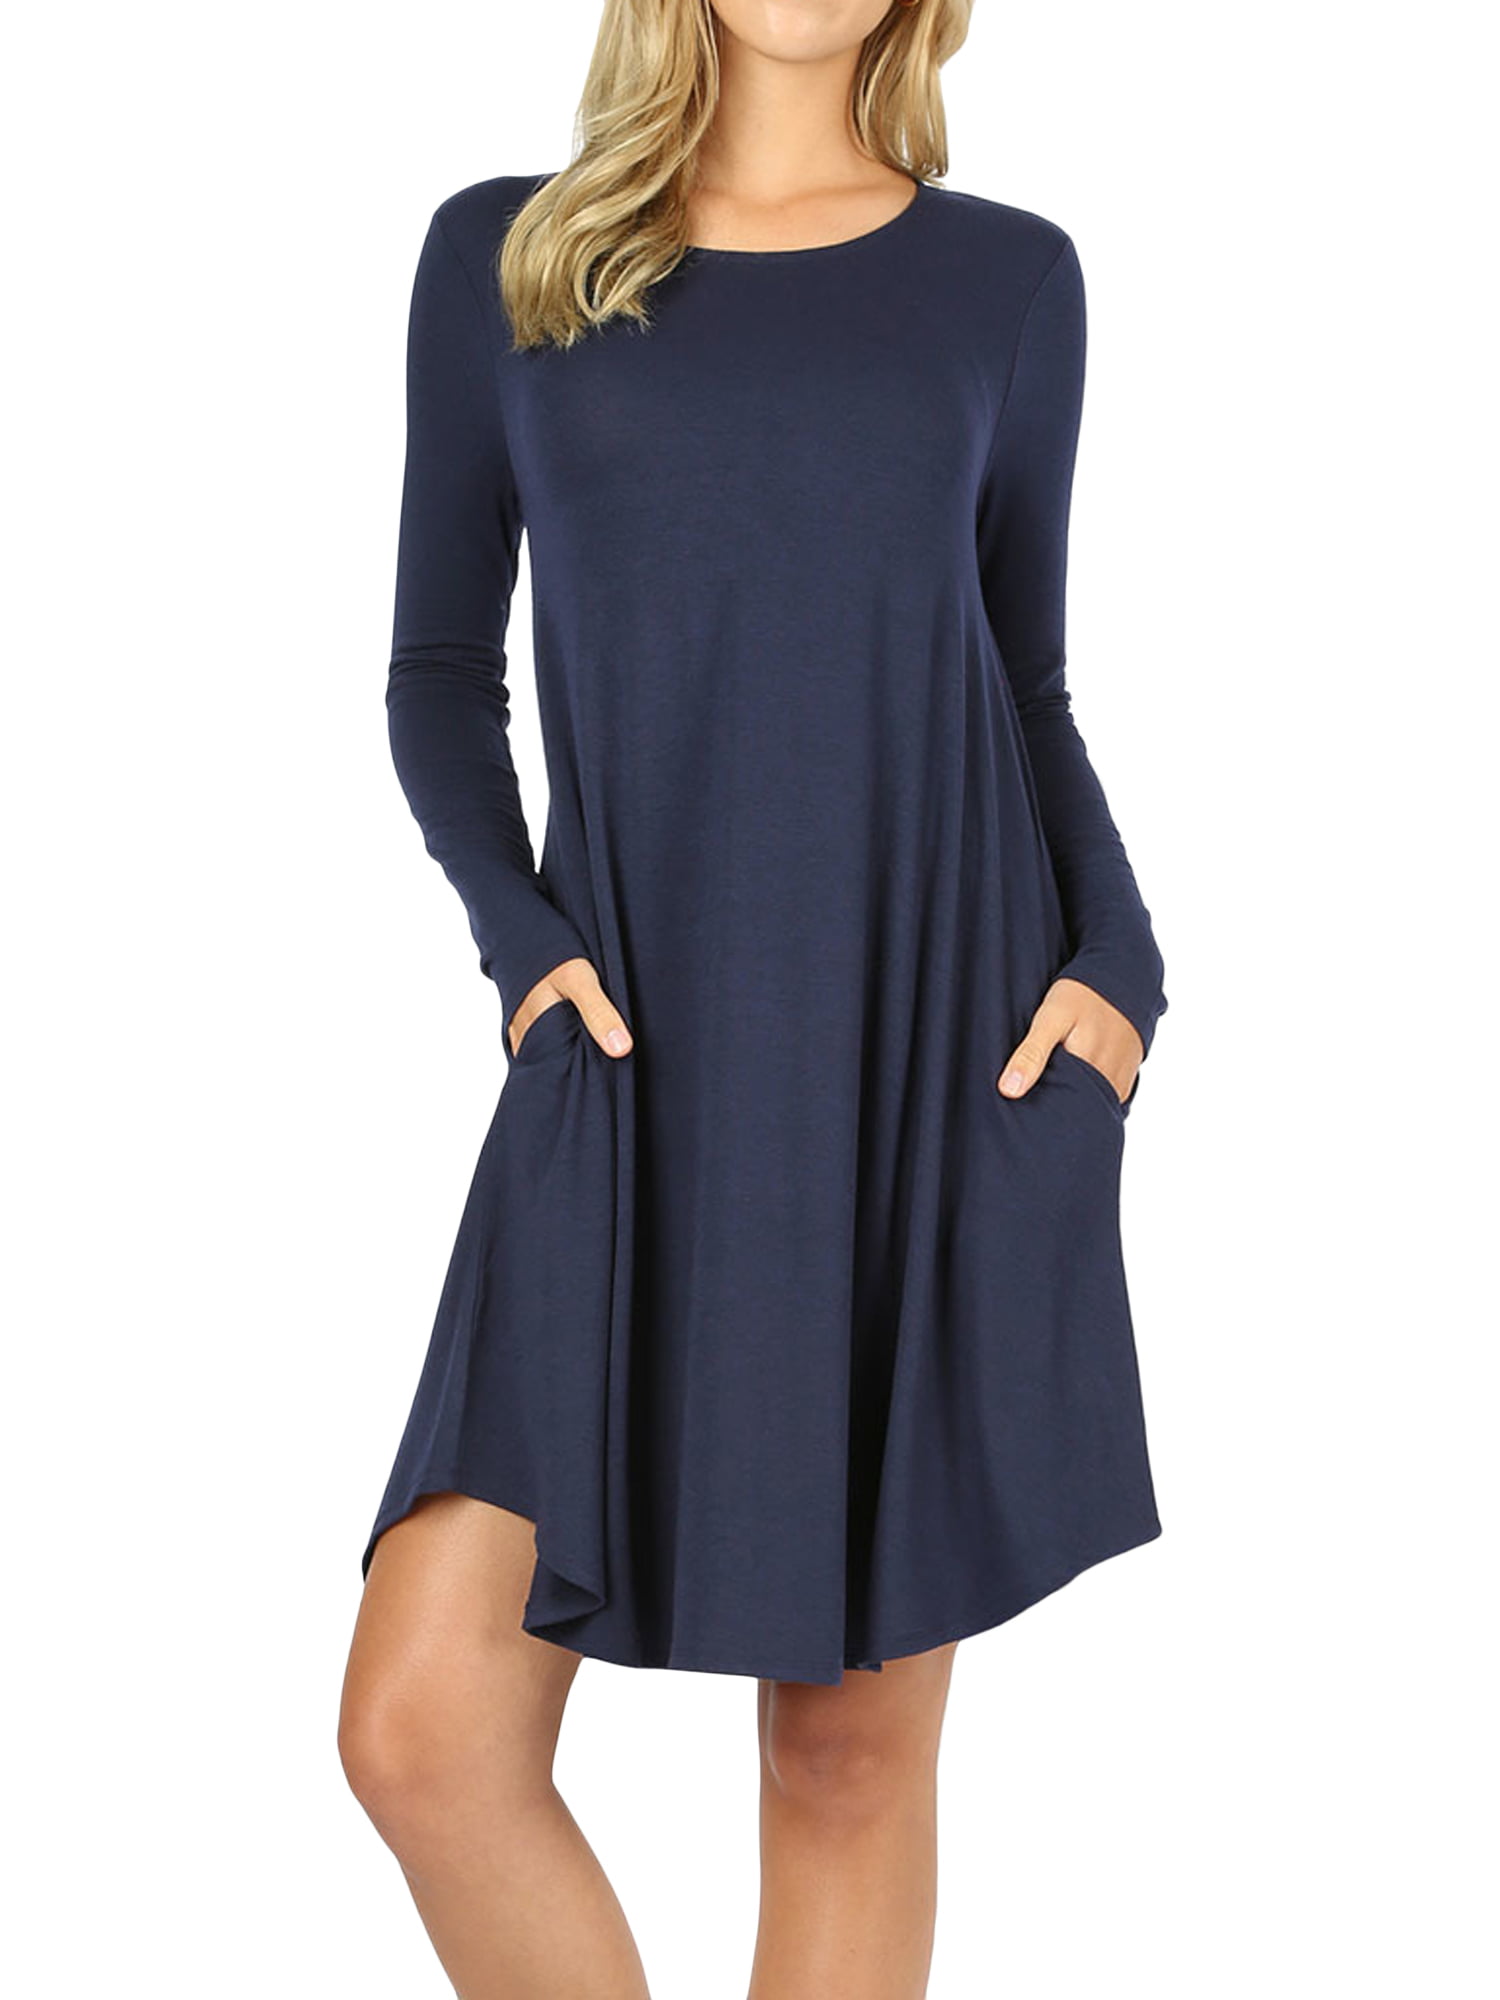 TheLovely - Women Long Sleeve Round Hem A-Line Pleated Swing Dress with ...